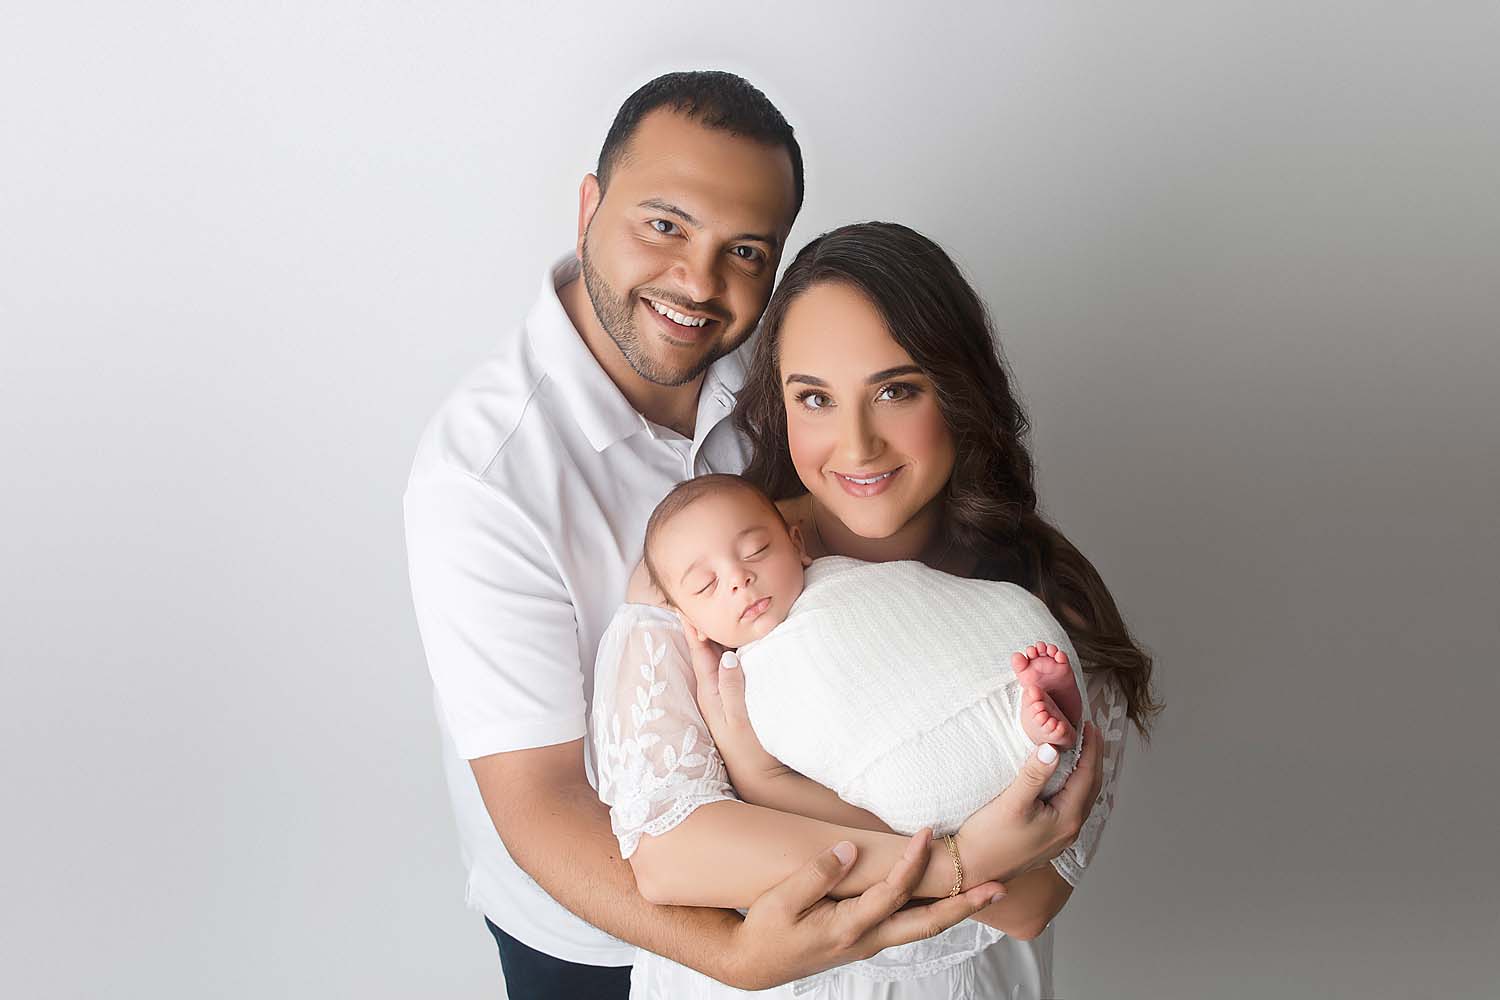 Family posed with baby for newborn photography session in kendall, FL